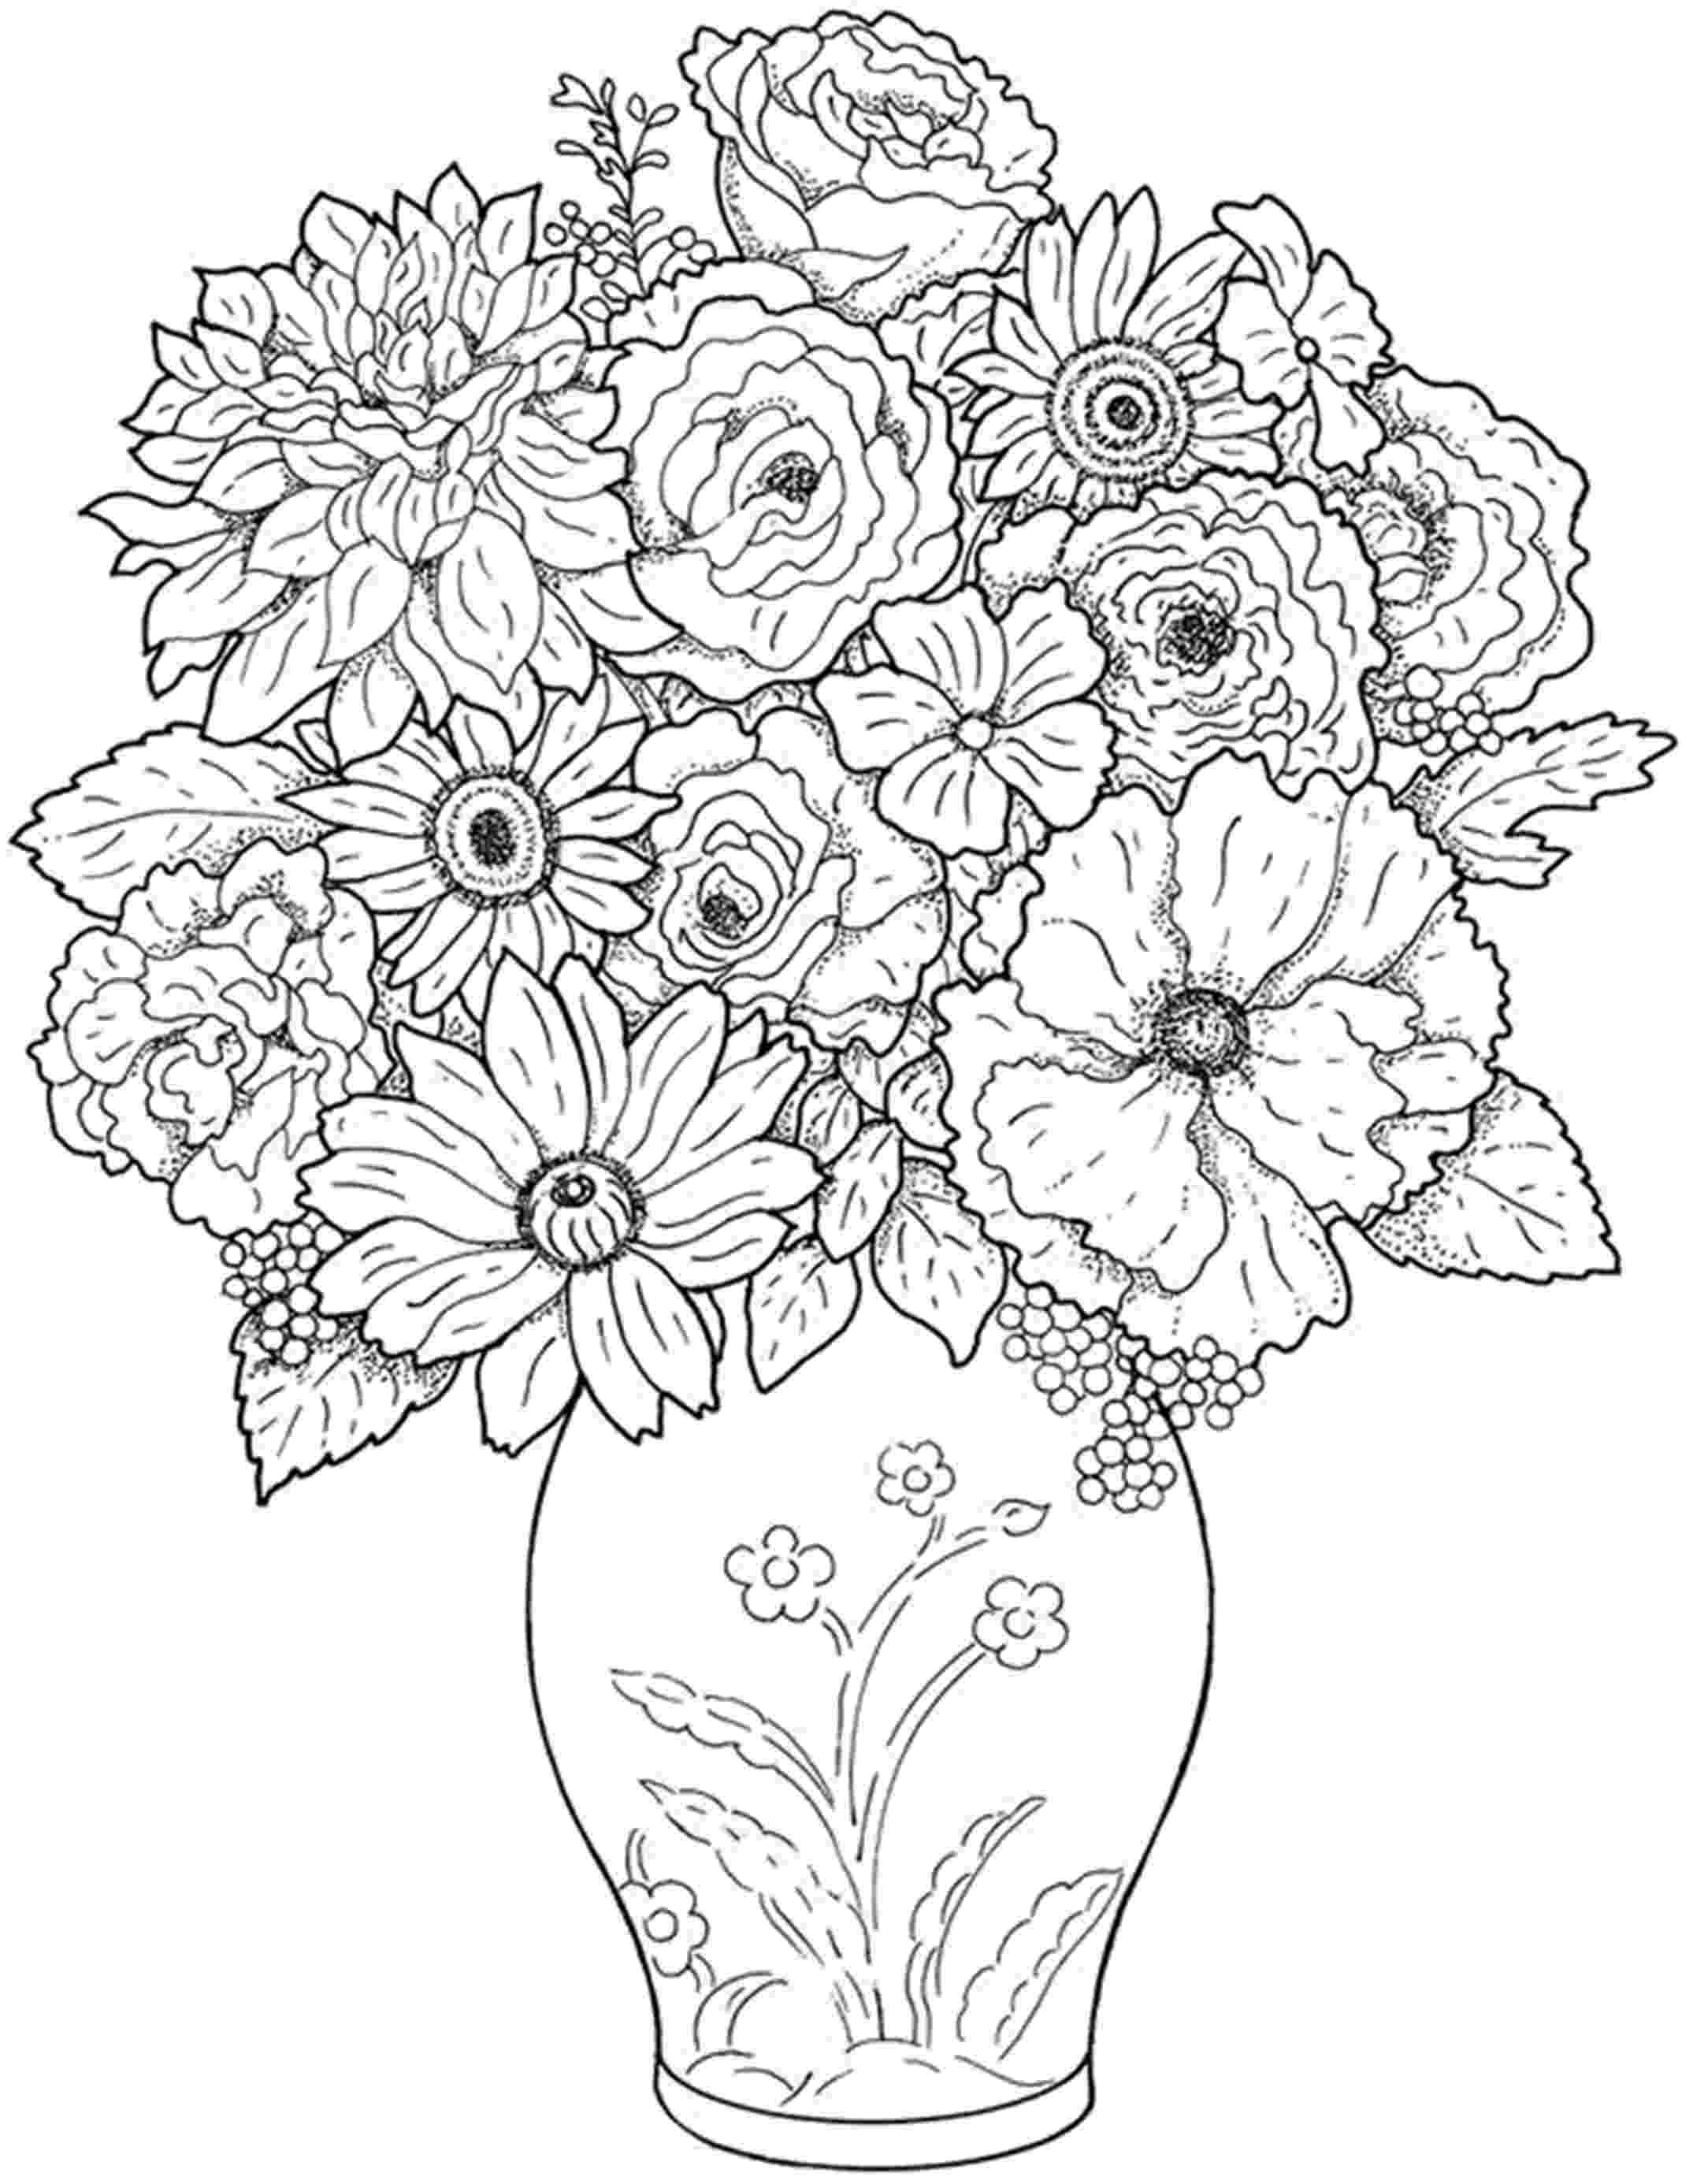 coloring flower pictures free printable flower coloring pages for kids best coloring flower pictures 1 1